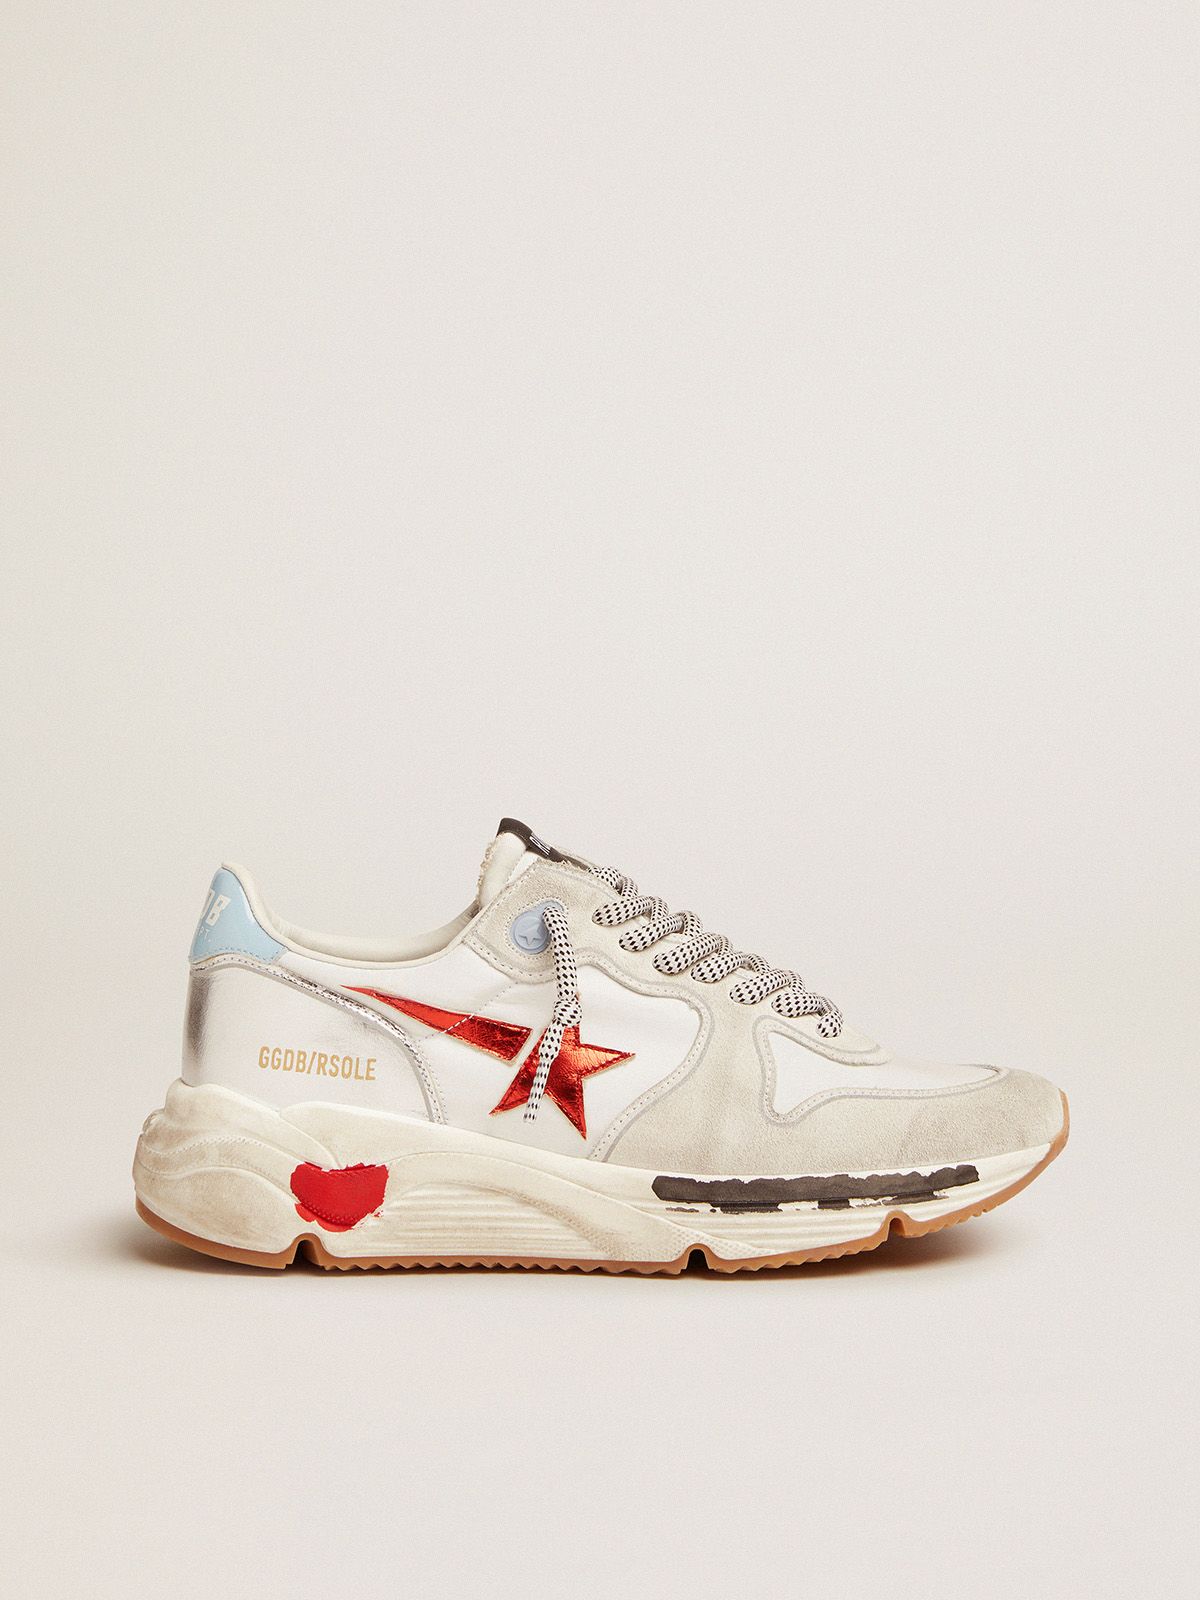 Golden Goose Ball Star Uomo Running Sole sneakers in nylon and suede with red laminated leather star